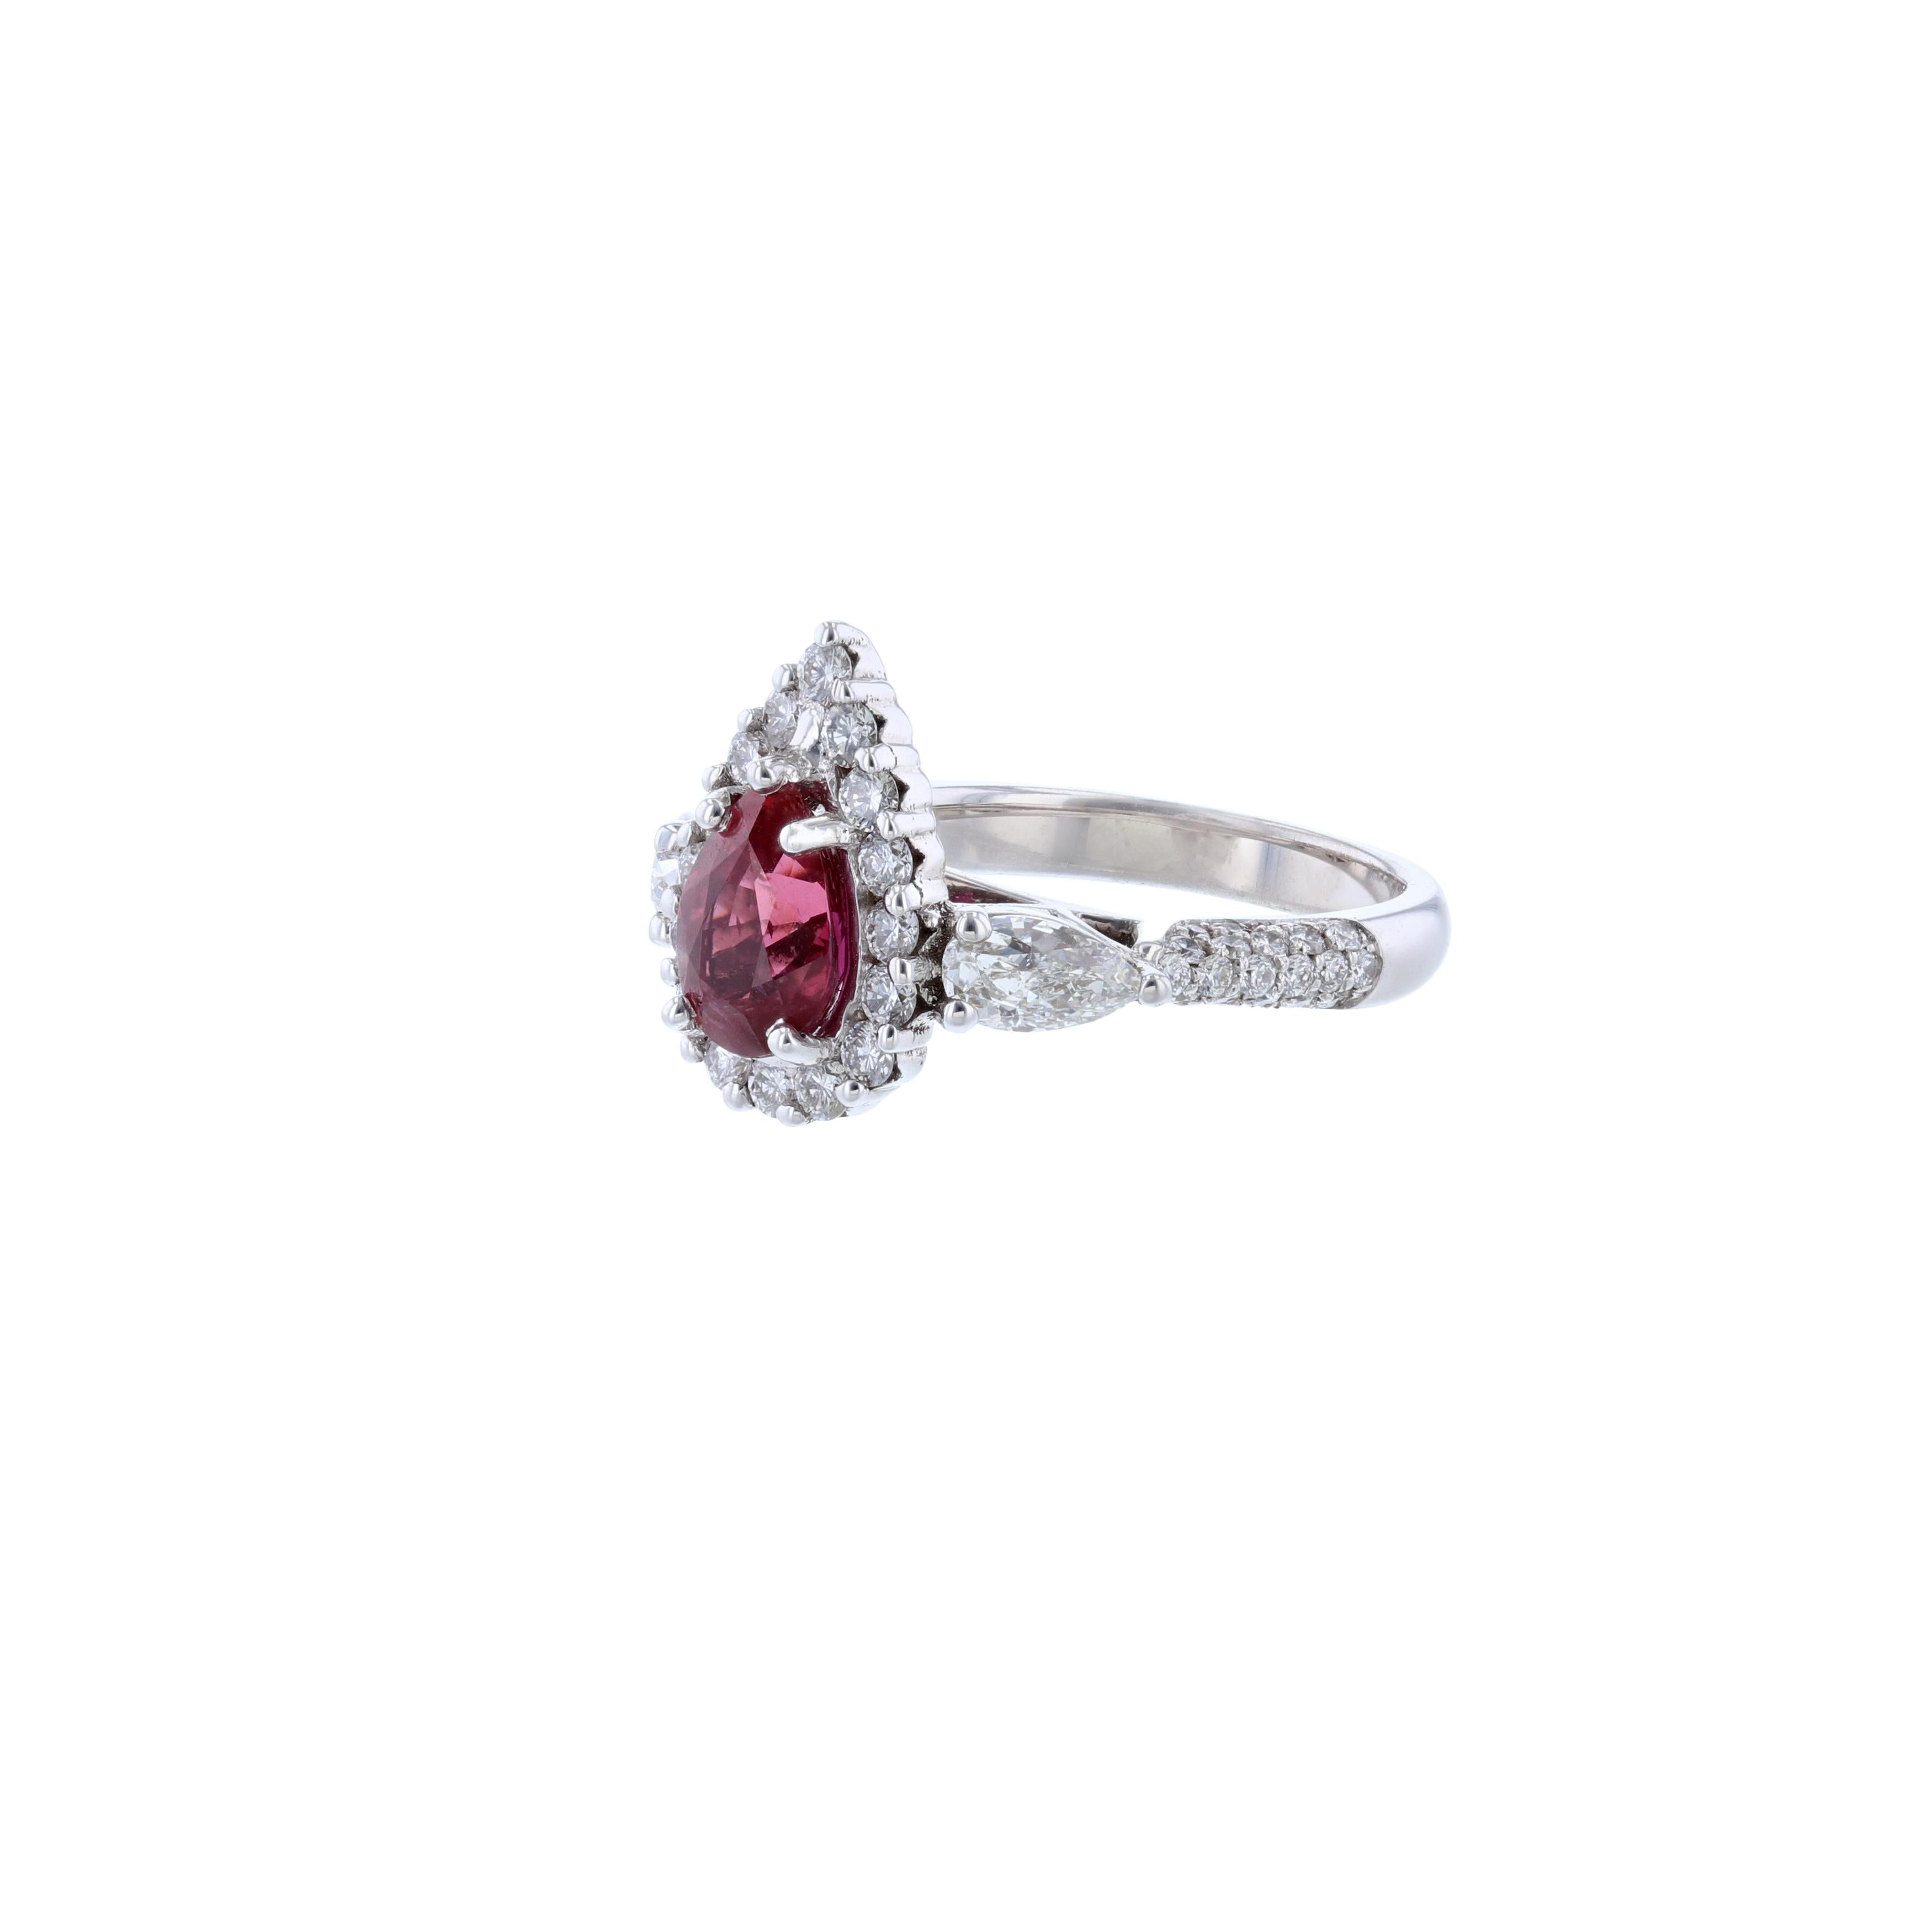 This ring is made in 14K white gold and features 1 pear shape natural corundum (no heat) ruby weighing 1.82 carats with a color grade (Red). WIth a GIA Report Number 5131284597. Includes 2 pear shape diamond accents weighing 0.77 carat. Surrounded